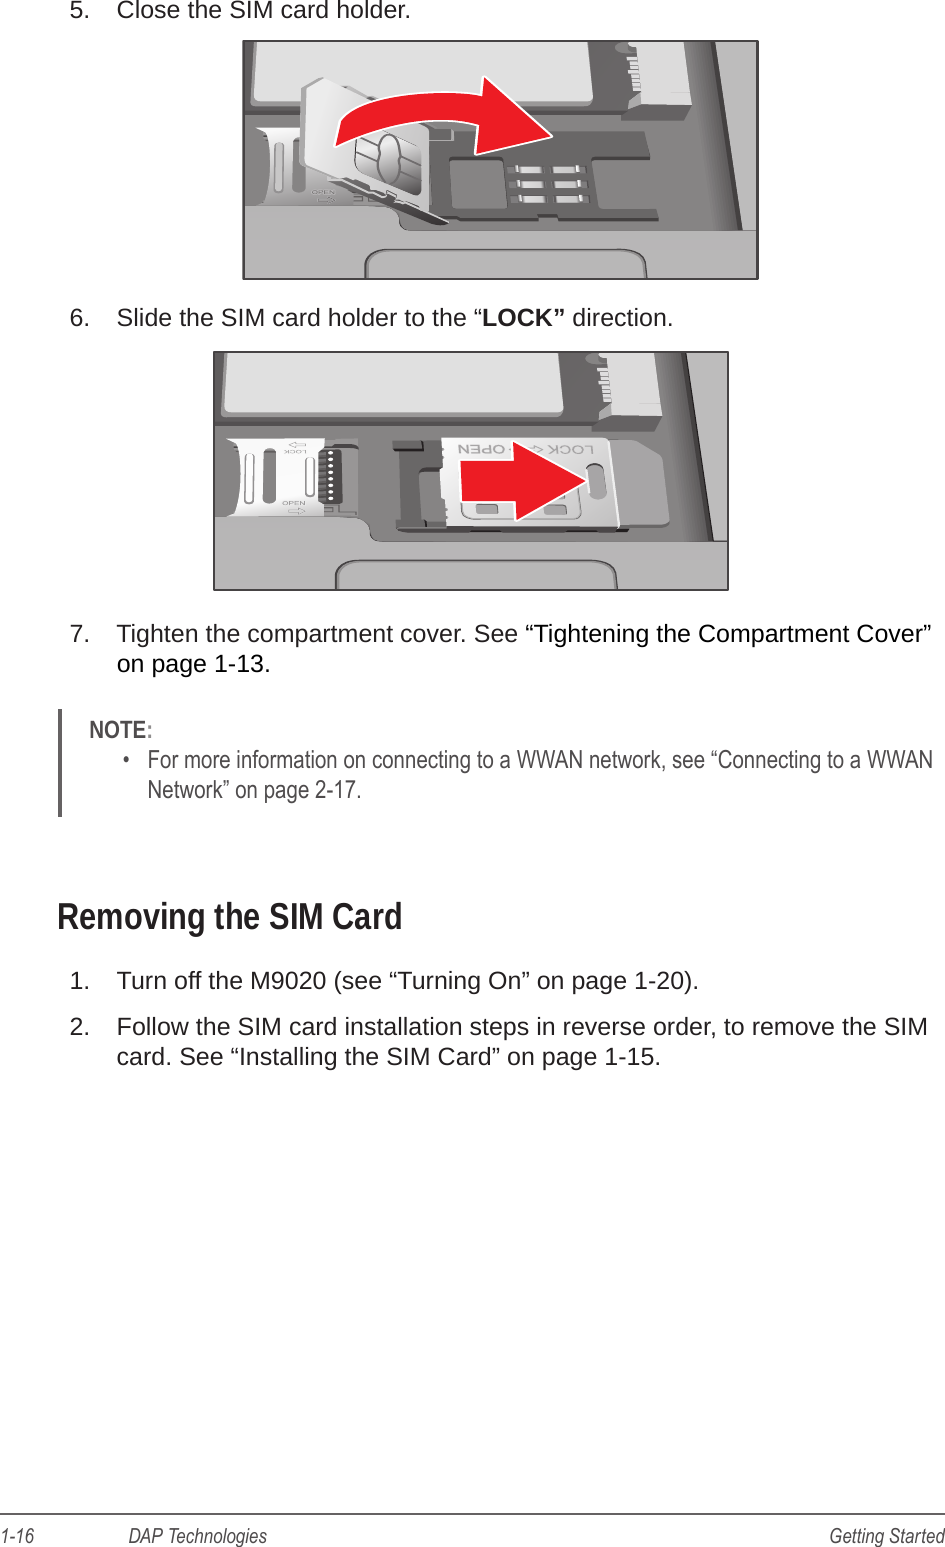 1-16                    DAP Technologies Getting Started5.  Close the SIM card holder.6.  Slide the SIM card holder to the “LOCK” direction.7.  Tighten the compartment cover. See “Tightening the Compartment Cover” on page 1-13. NOTE: •  For more information on connecting to a WWAN network, see “Connecting to a WWAN Network” on page 2-17.Removing the SIM Card1.  Turn off the M9020 (see “Turning On” on page 1-20).2.  Follow the SIM card installation steps in reverse order, to remove the SIM card. See “Installing the SIM Card” on page 1-15.